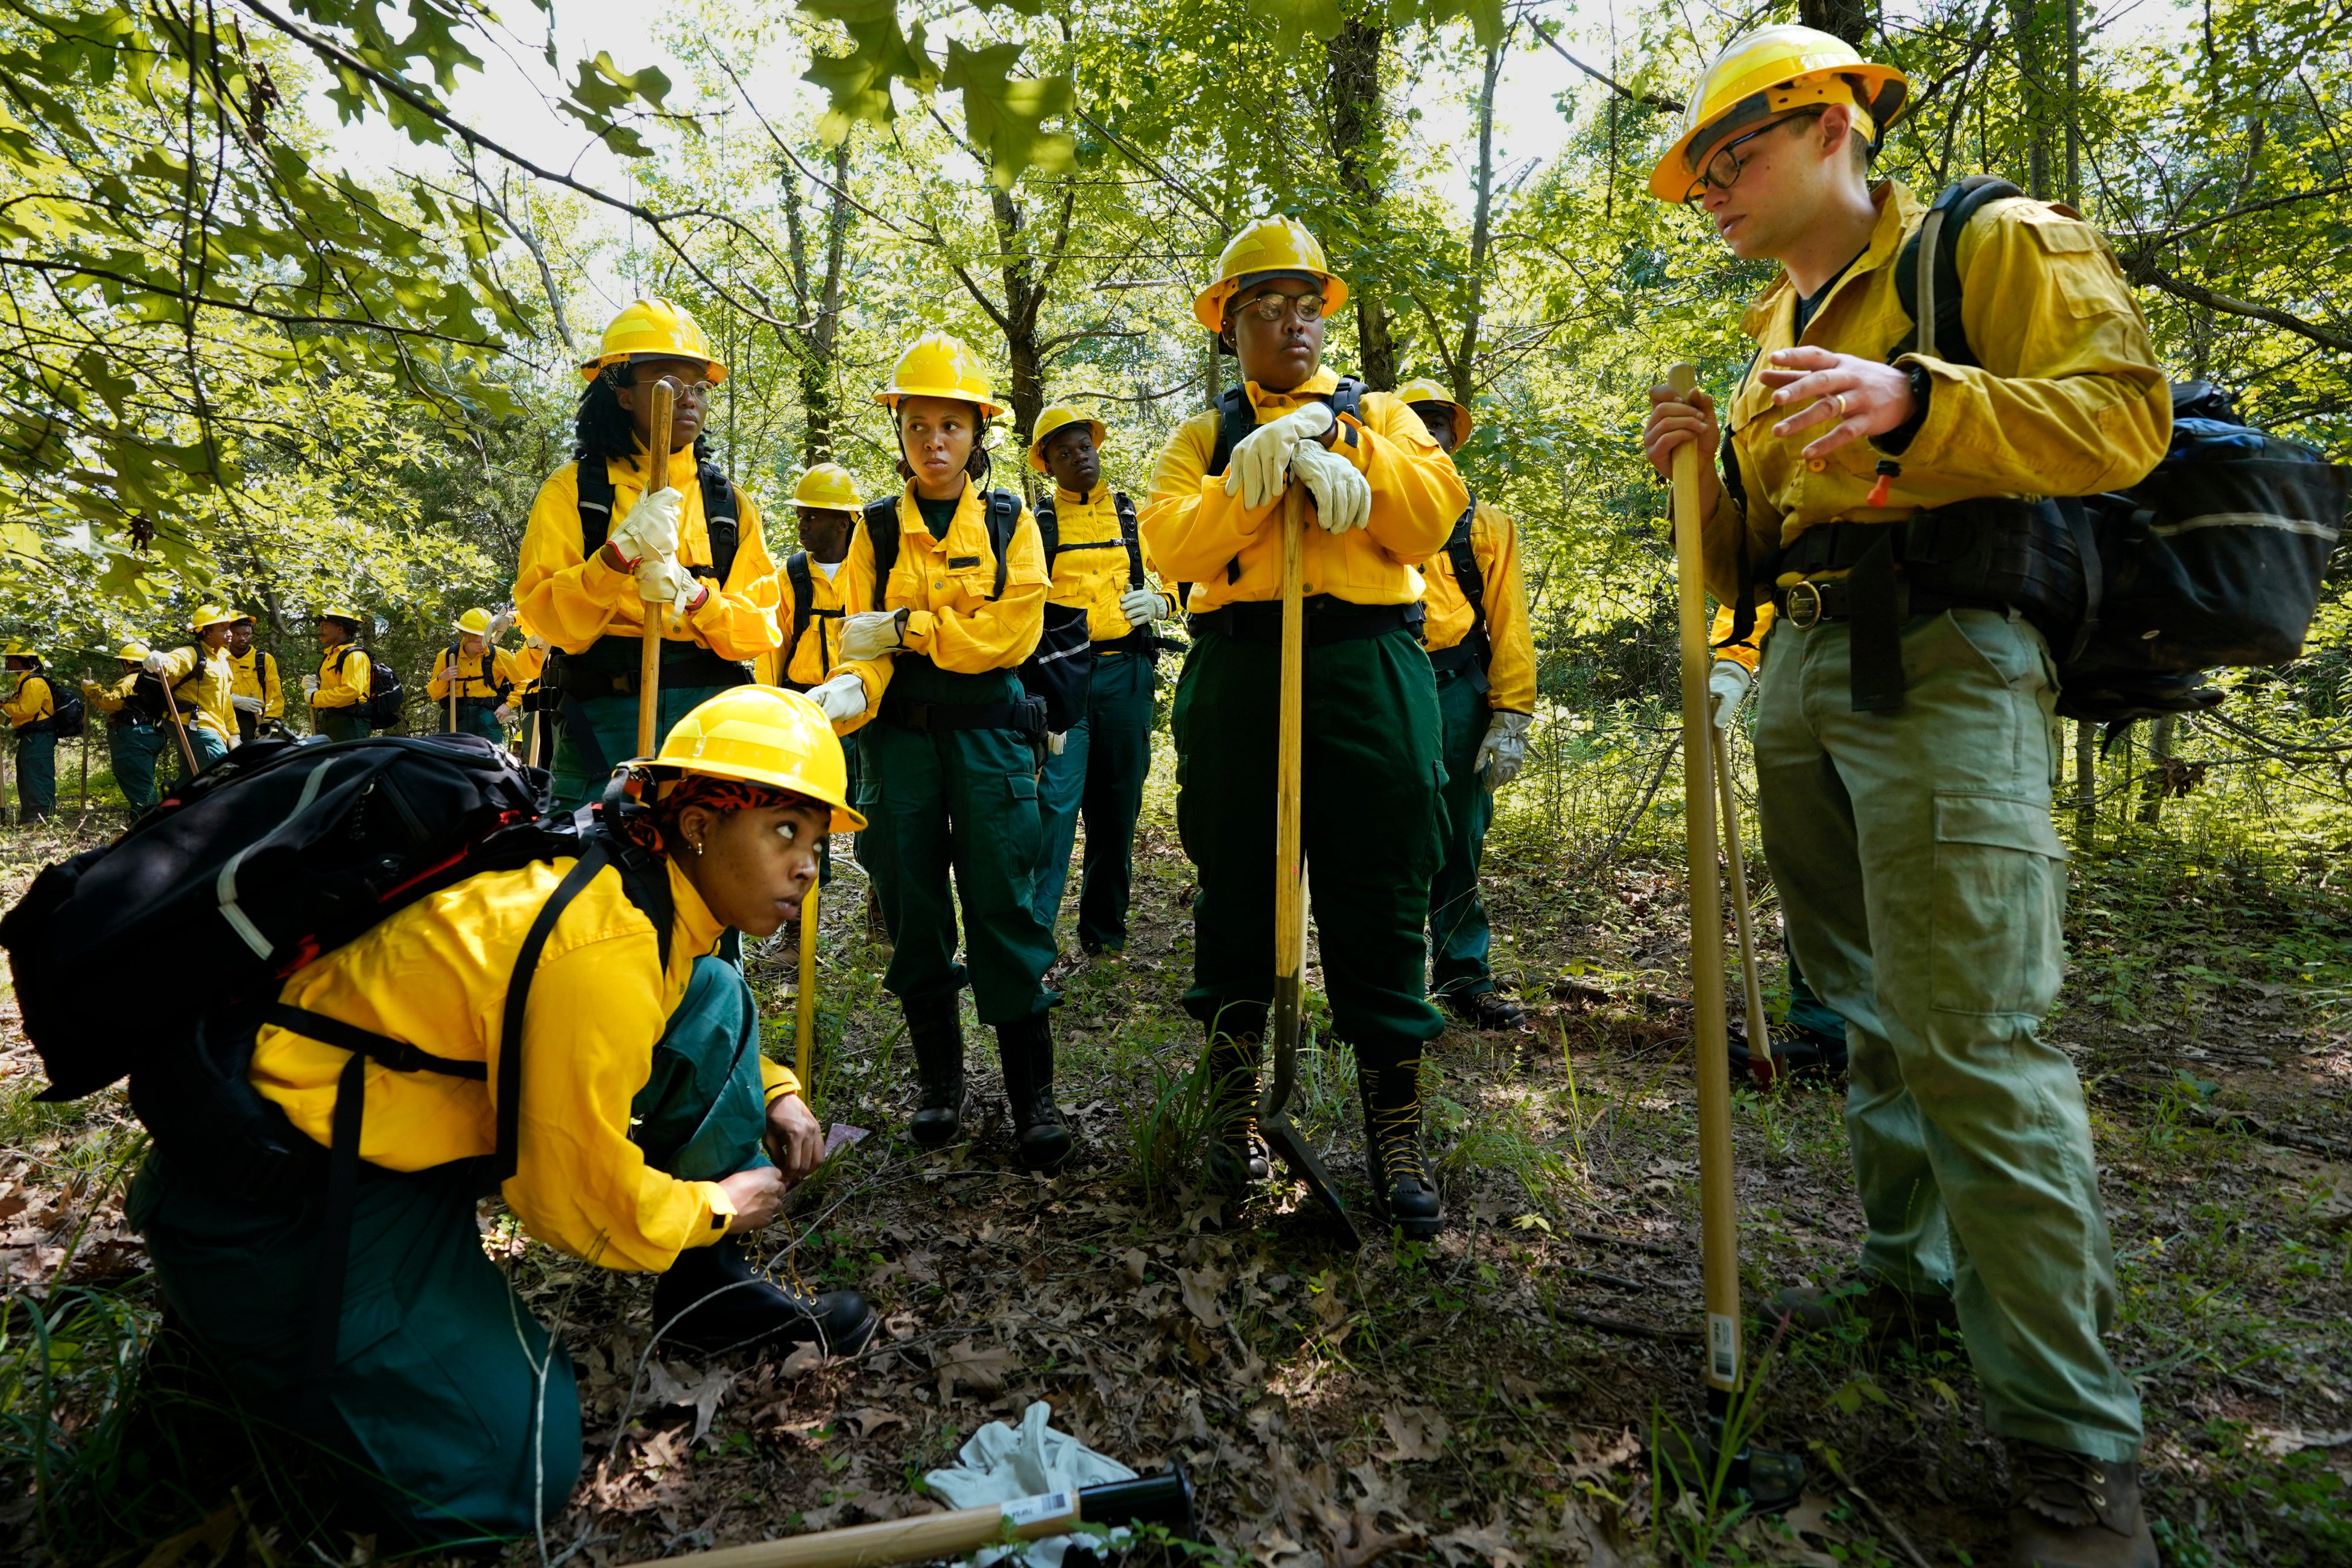 Ben McLane, pictured right, during a wildland firefighter training in June 2023 in Hazel Green, Alabama